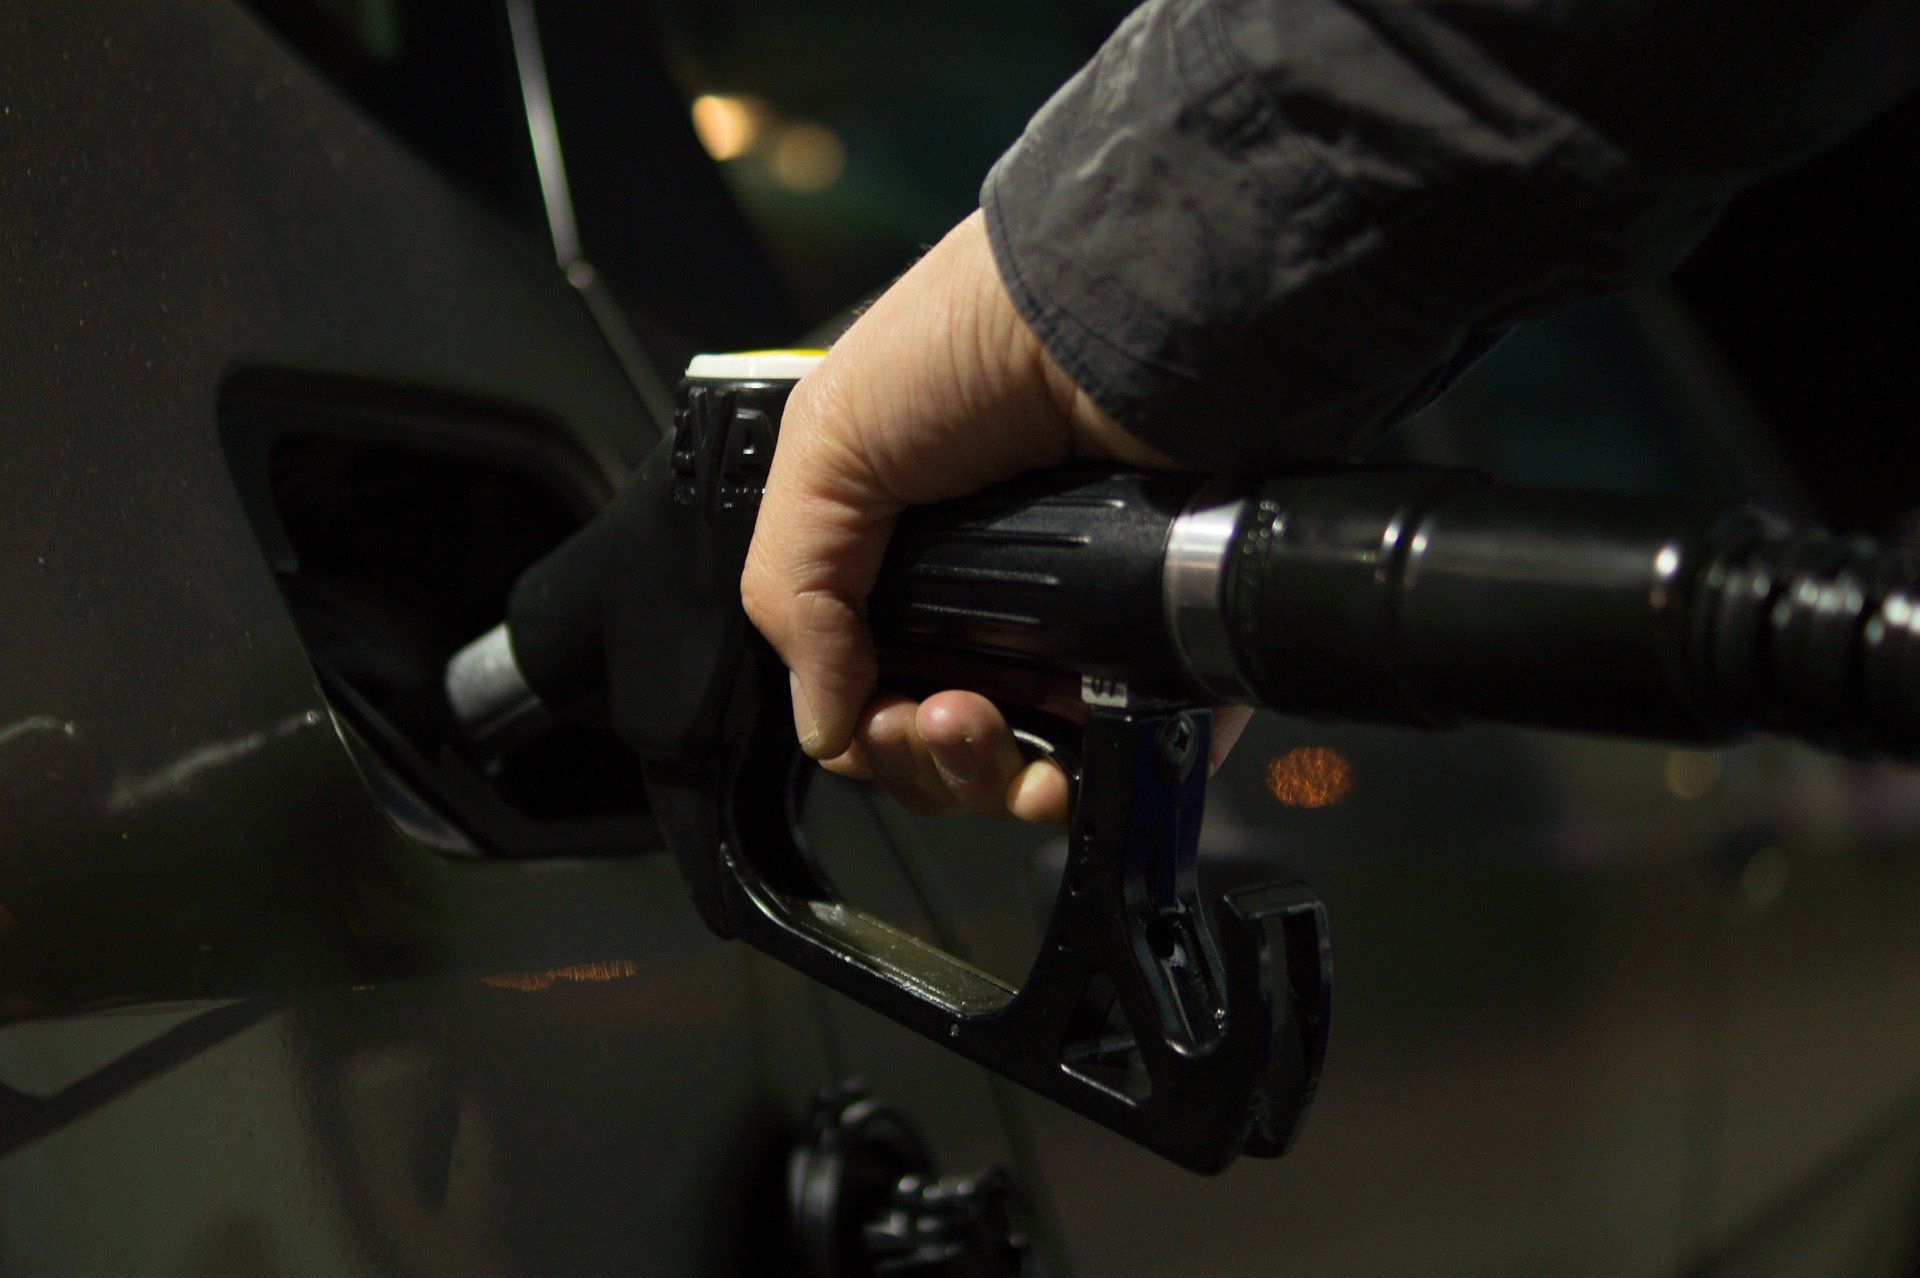 Fuel Price today: Petrol priced at Rs 95.41, diesel Rs 86.67 in Delhi on December 6